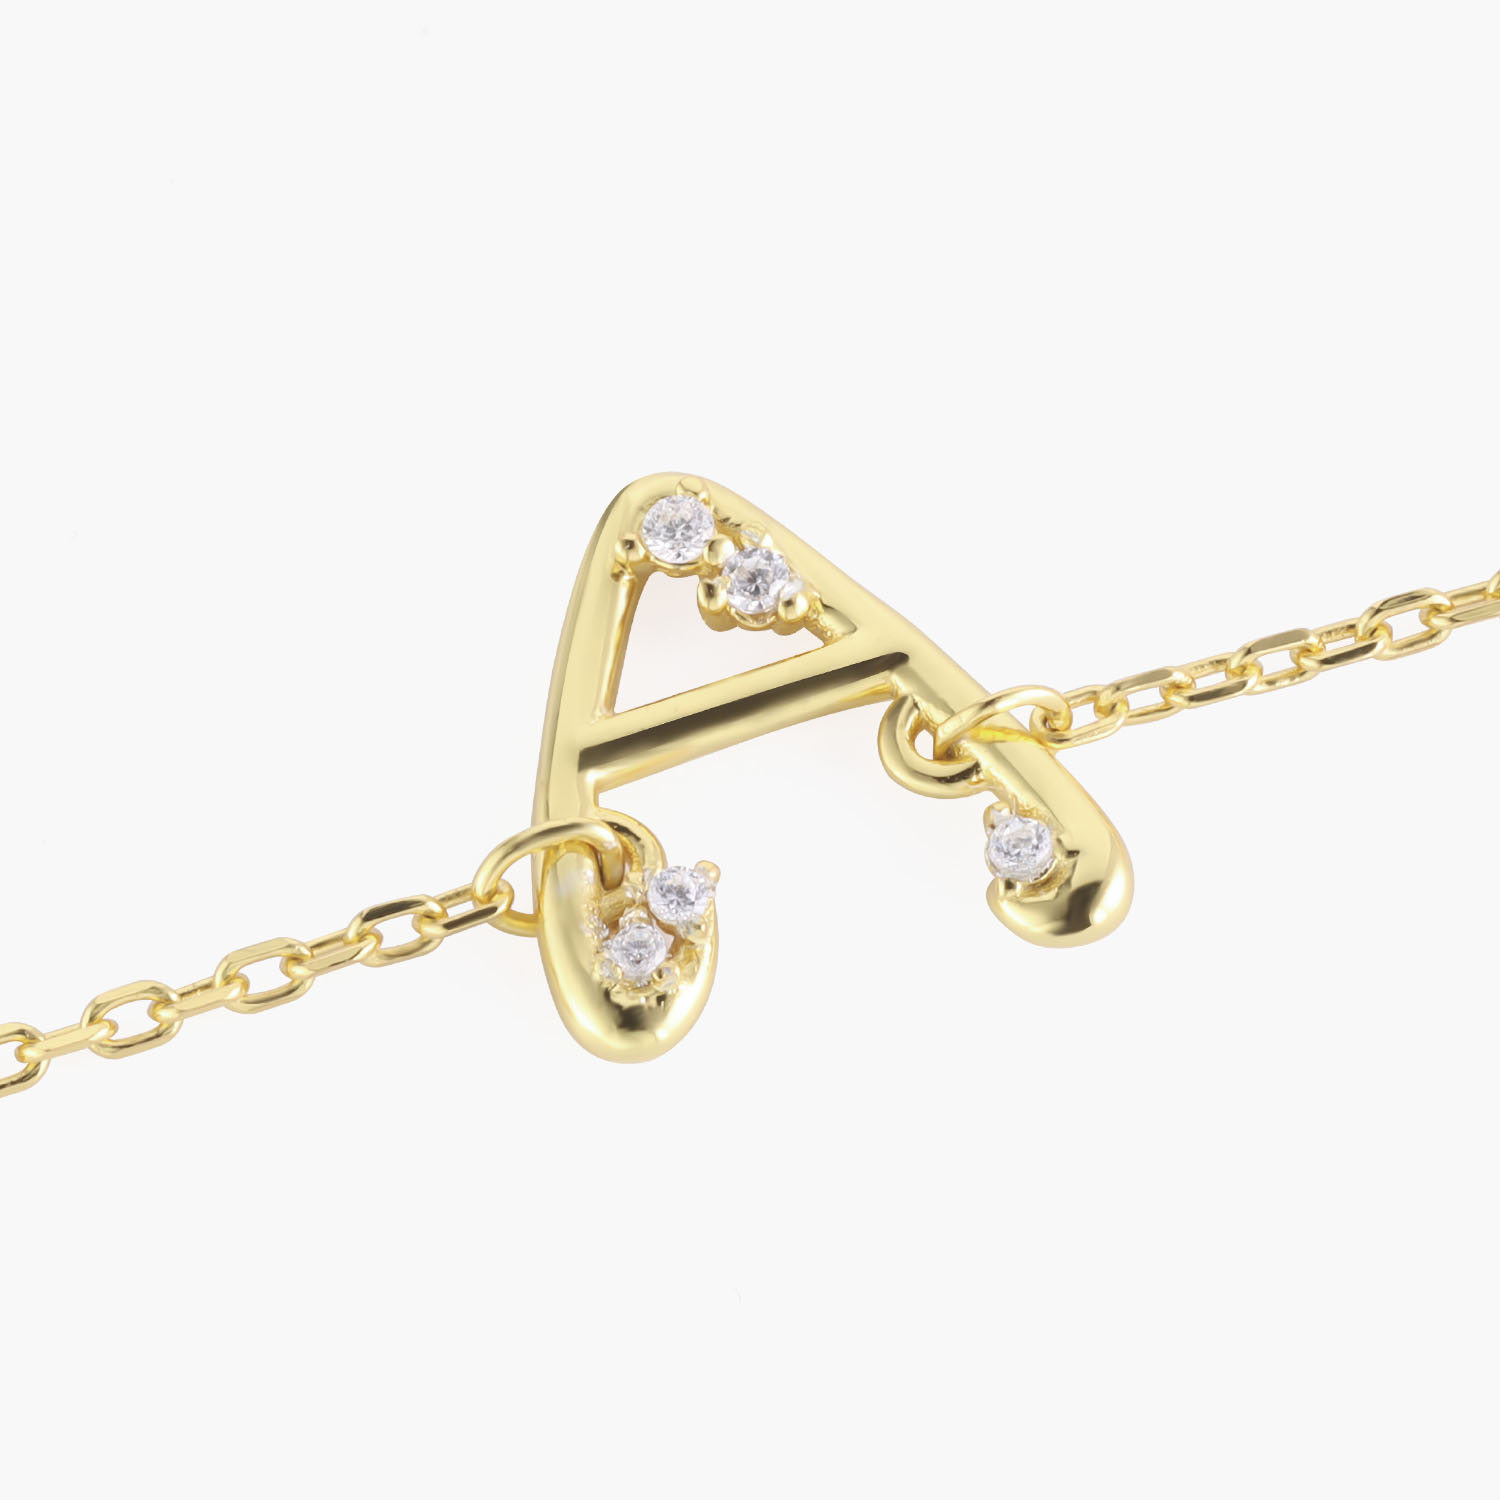 A Letters Gold Plated Customized Diamond Necklace